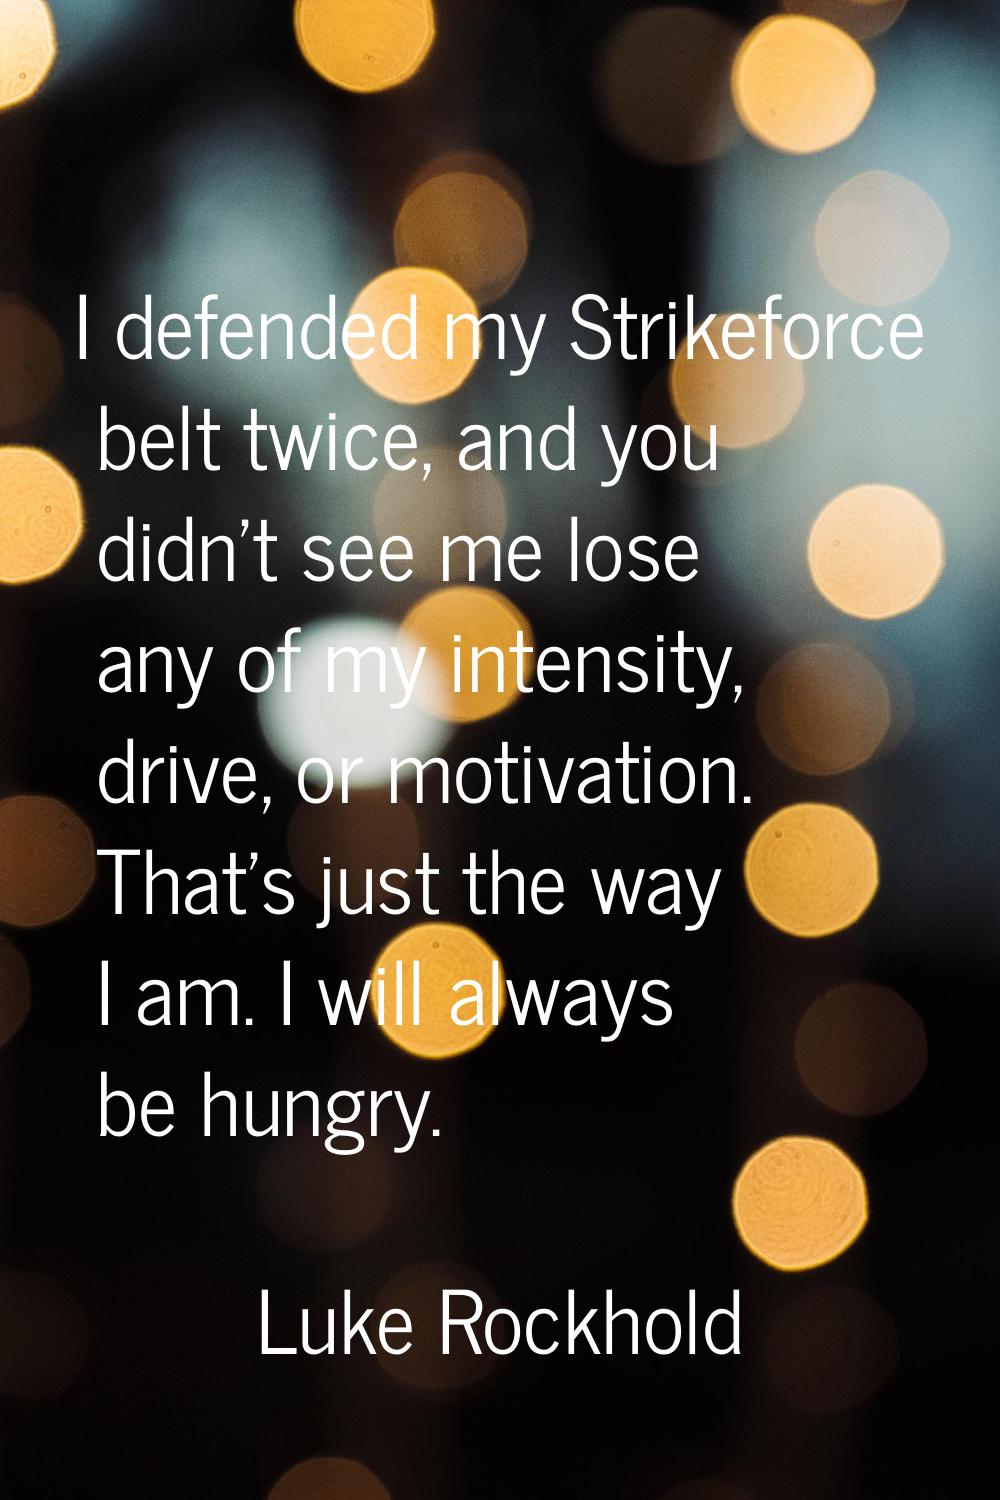 I defended my Strikeforce belt twice, and you didn't see me lose any of my intensity, drive, or mot